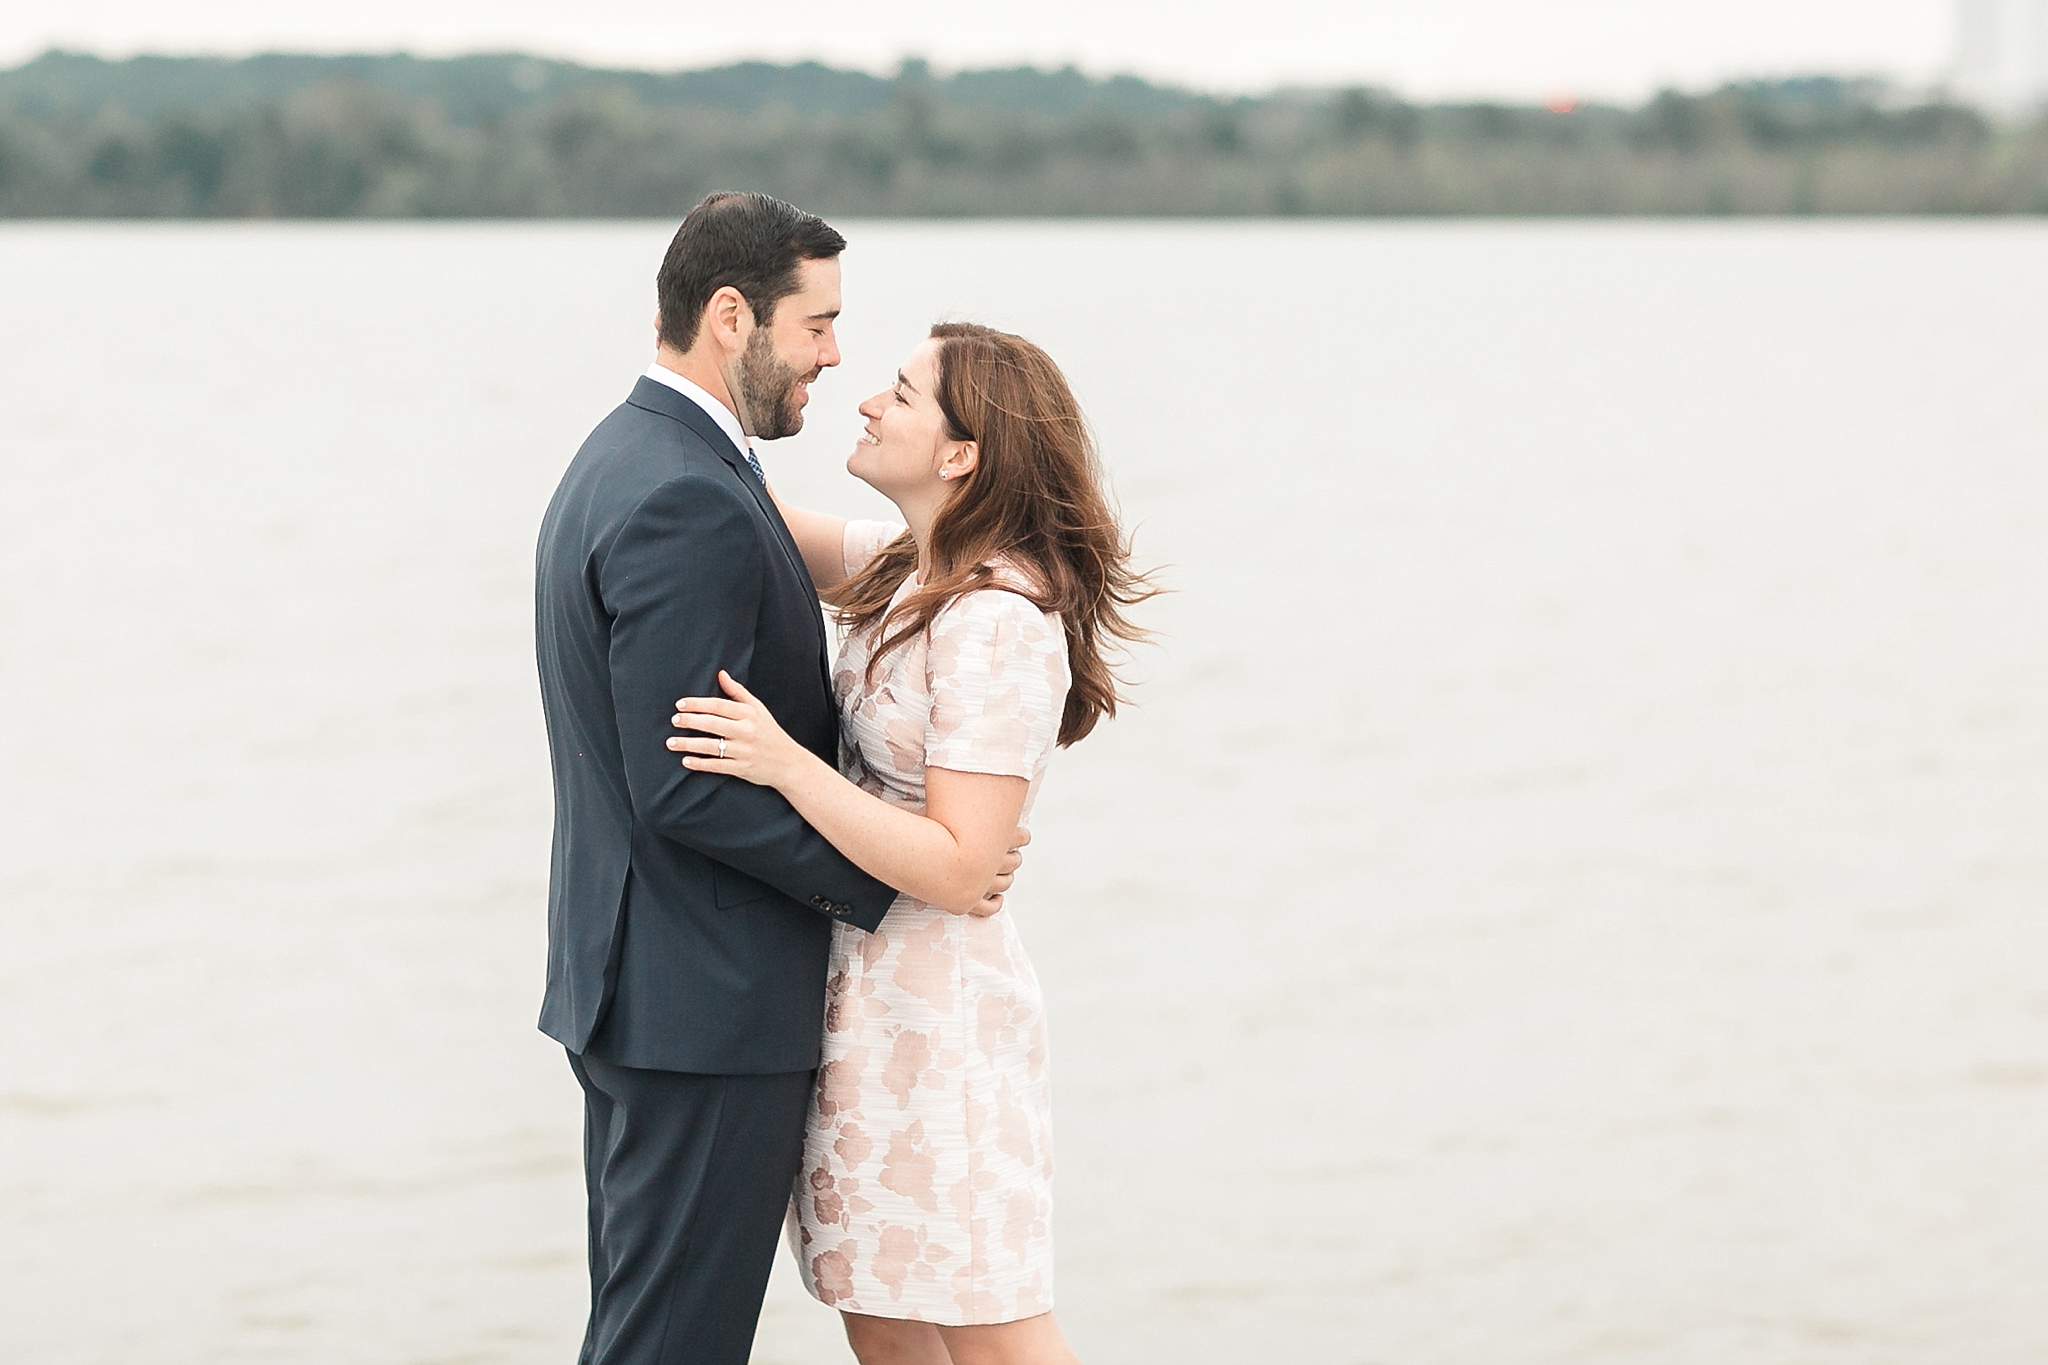 This set of timeless engagement photos were taken in Old Town Alexandria, VA by DC wedding photographer, Alicia Lacey.